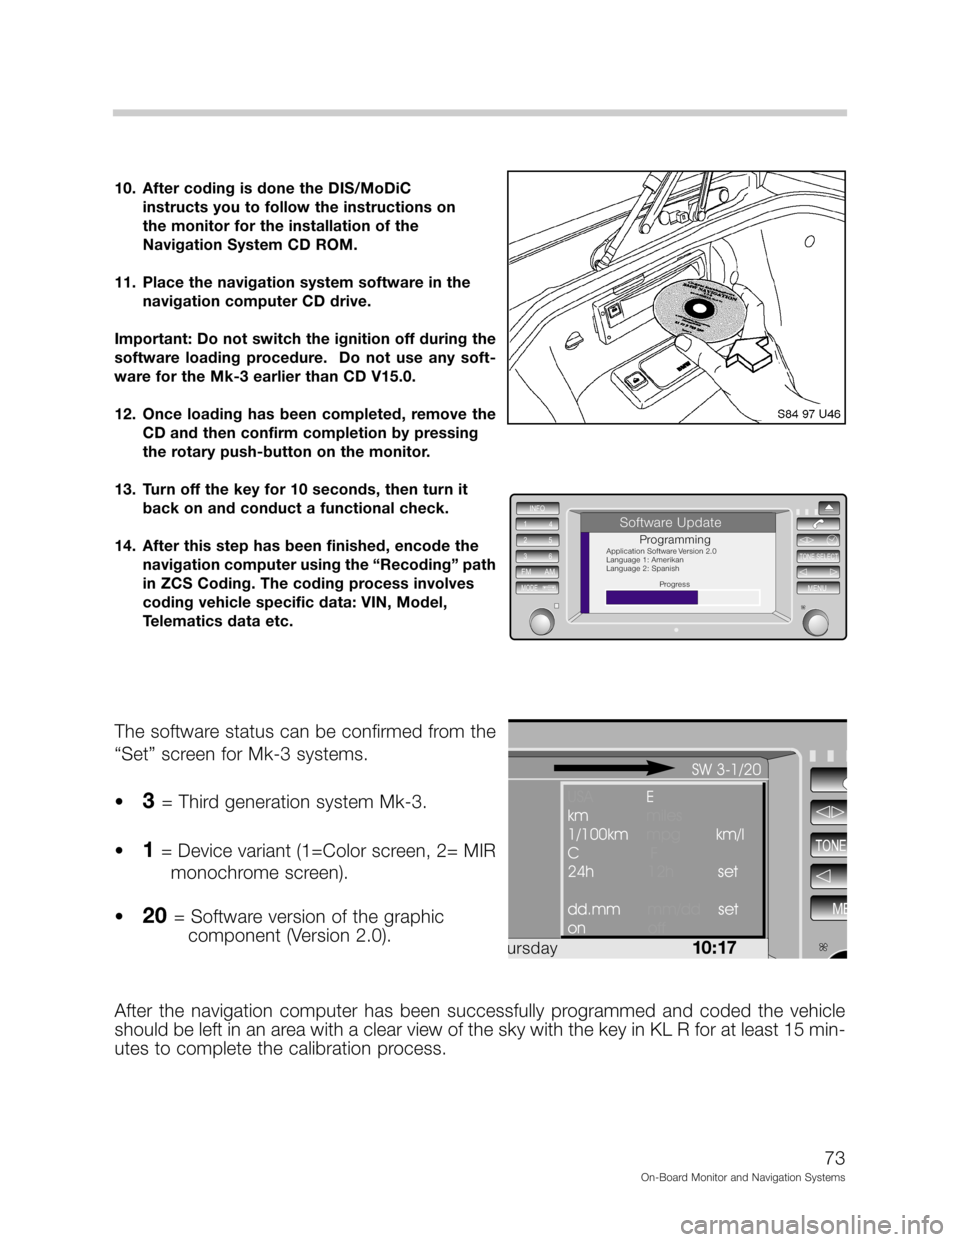 BMW 5 SERIES 1999 E39 On Board Monitor System Workshop Manual ,.



"&
(	
#%) 6 !1 !&
=	 2
 !-67& ! !!
&.! 6& !"" !6&
", 1" !-.2	)
##) 